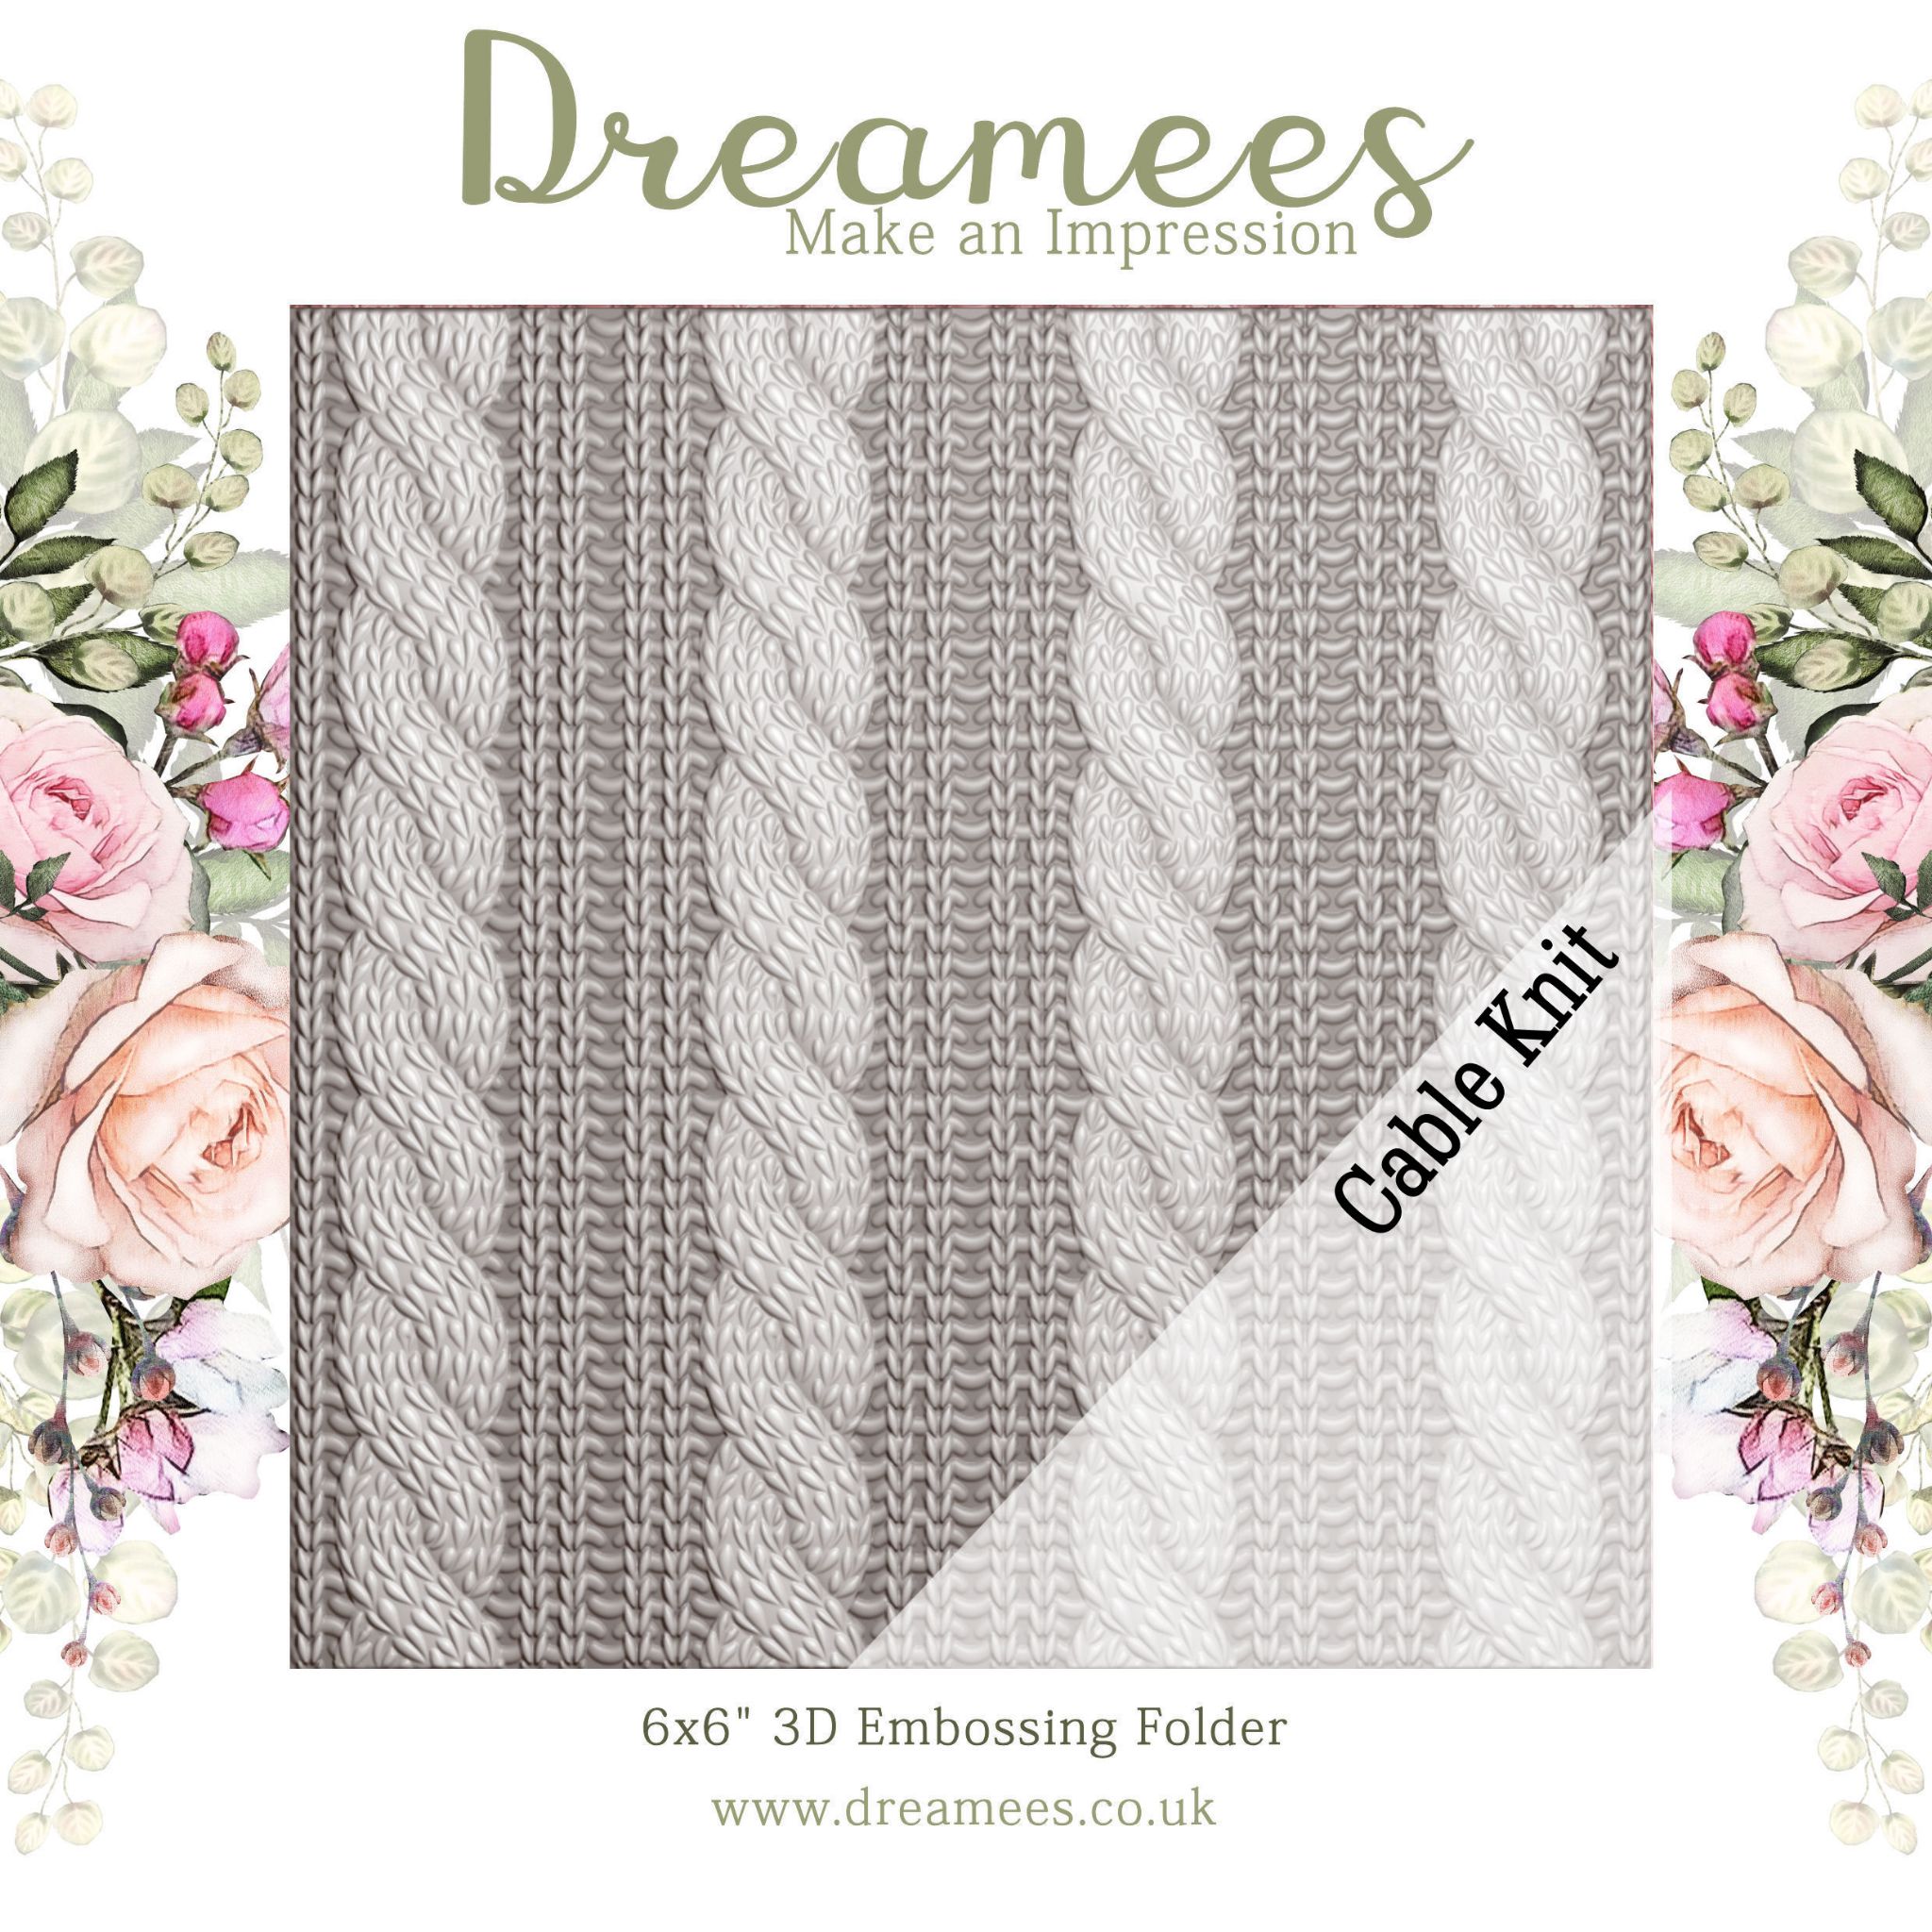 Make an Impression: 3D Cable Knit 6x6 Embossing Folder